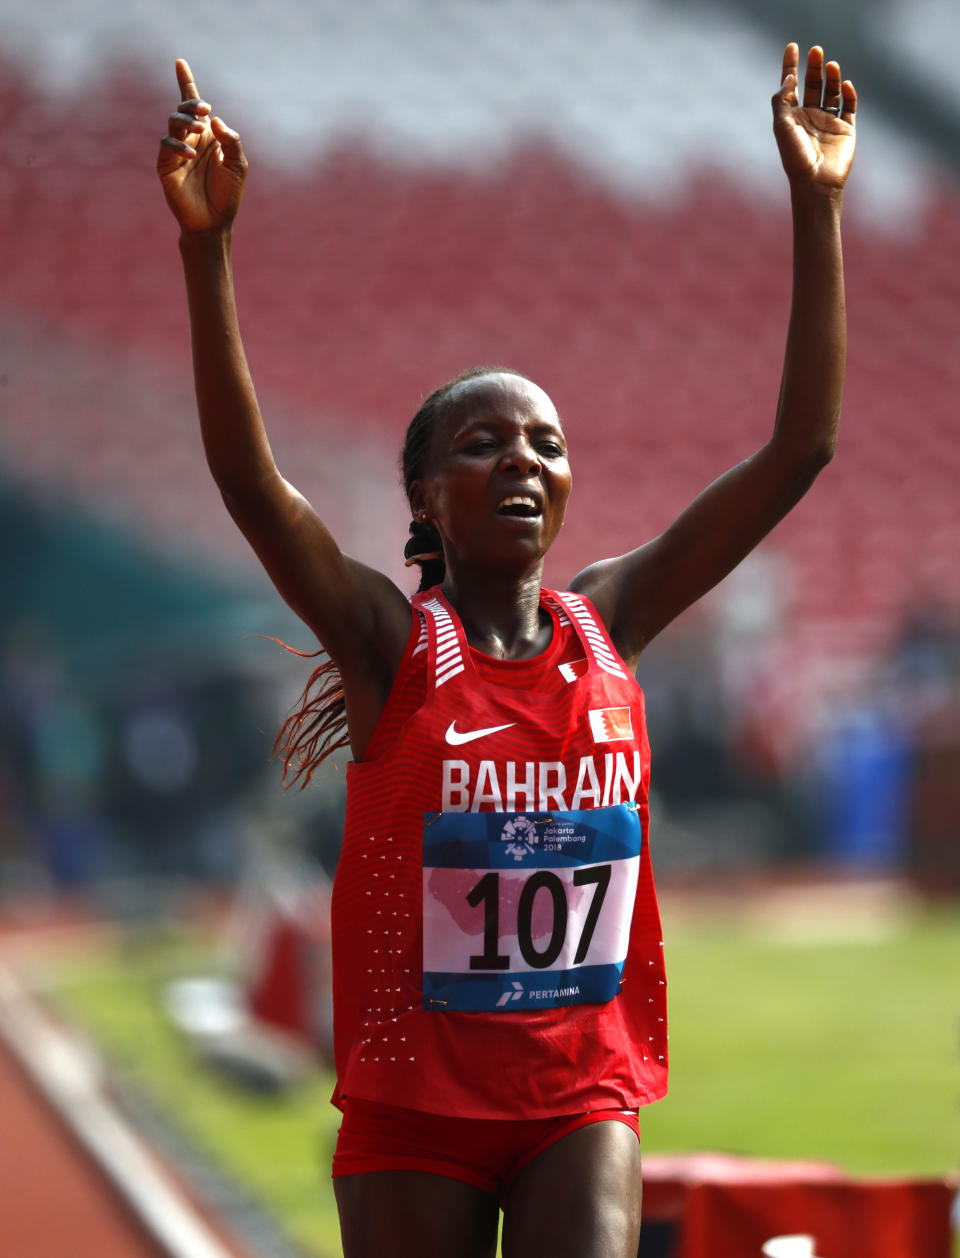 Bahrain's Rose Chelimo crosses the finish line to win the women's marathon during the athletics competition at the 18th Asian Games in Jakarta, Indonesia, Sunday, Aug. 26, 2018. (AP Photo/Bernat Armangue)